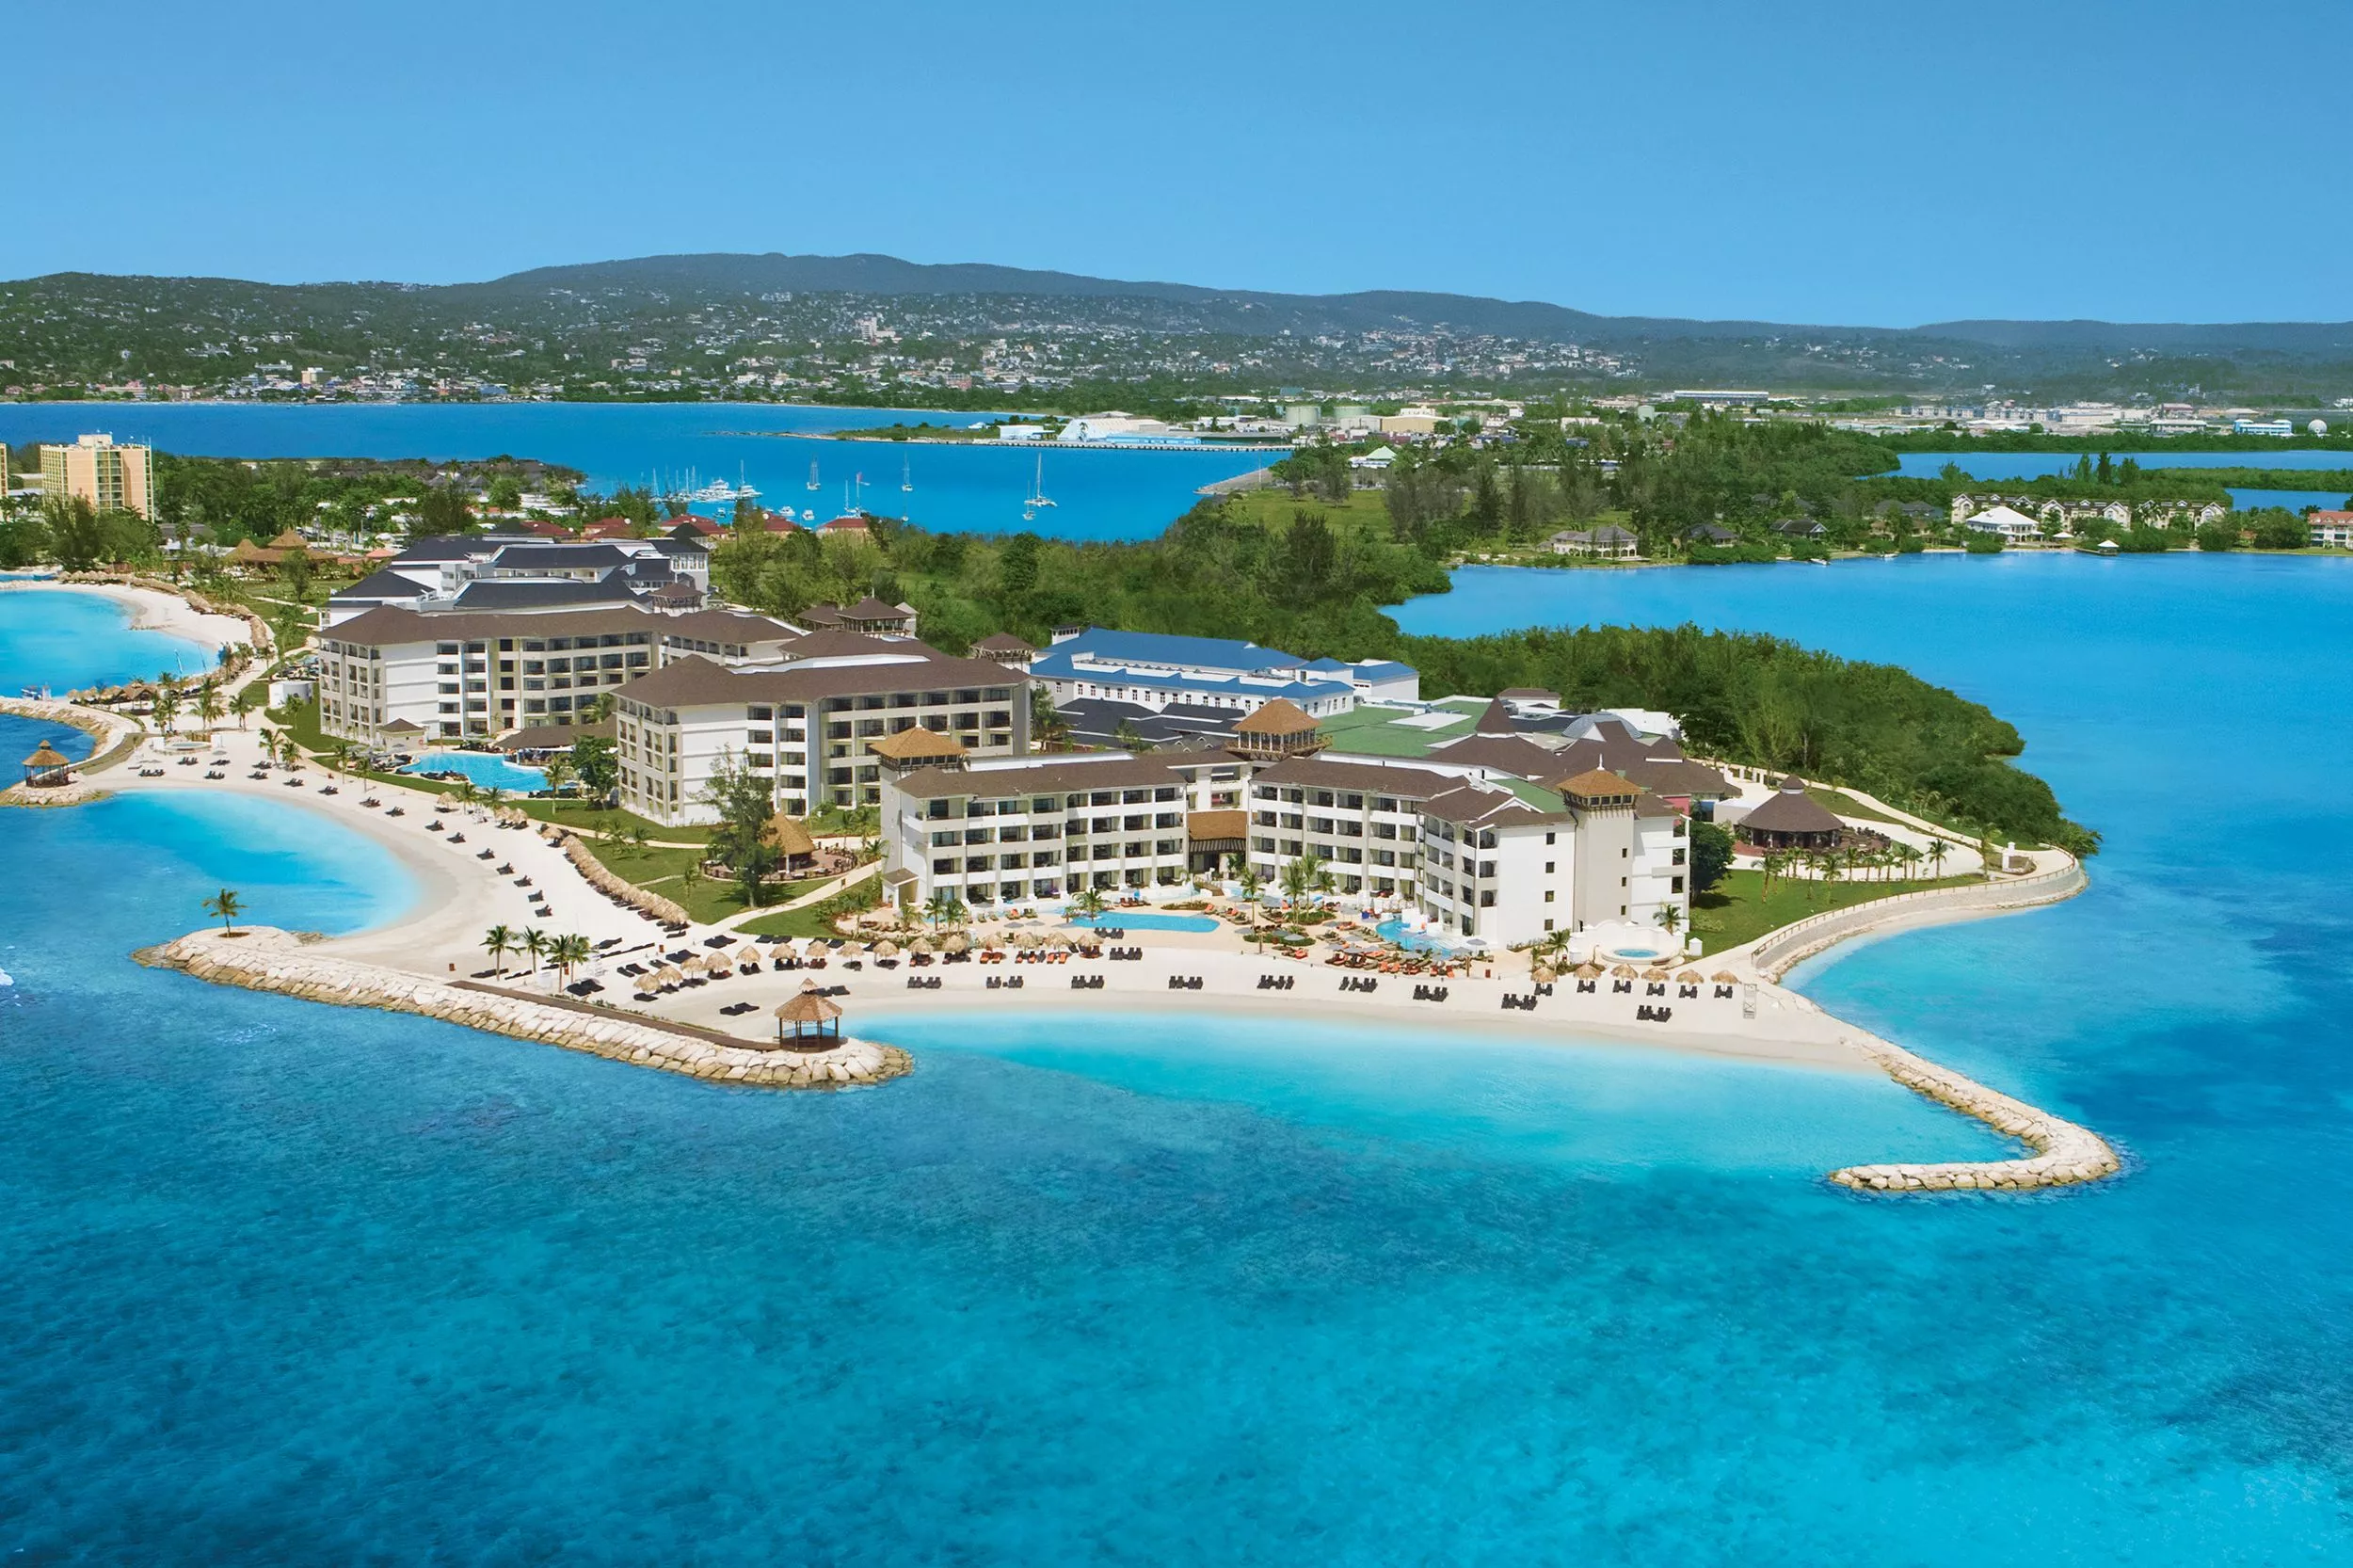 Secrets Wild Orchid Montego Bay in Jamaica, Caribbean | Sex Hotels,Sex-Friendly Places - Rated 3.7